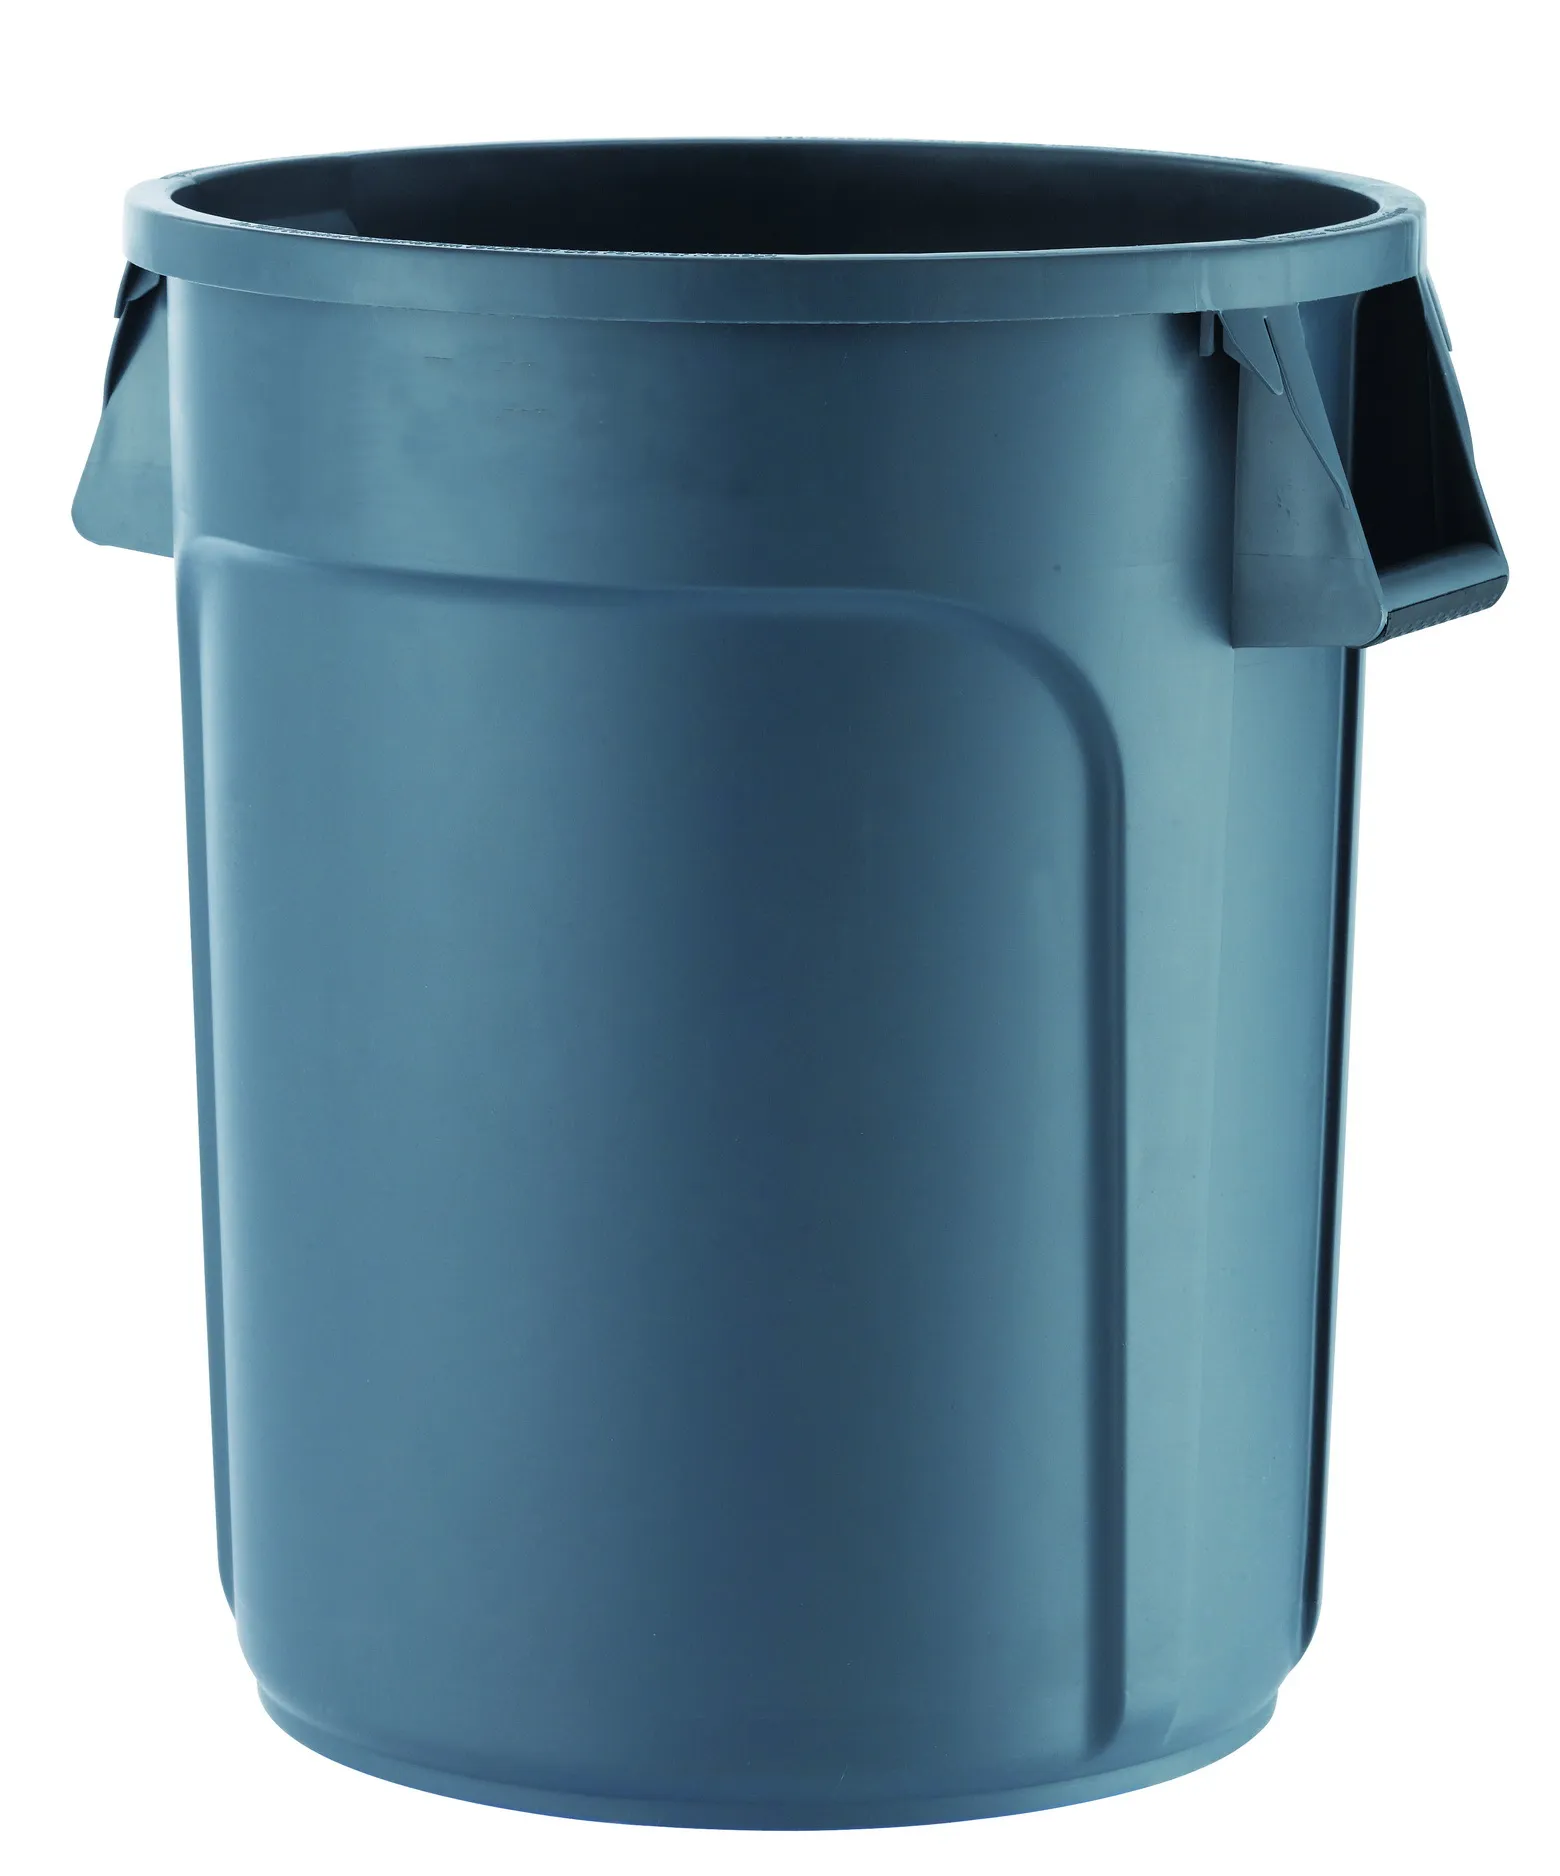 outdoor commercial products brute Heavy-Duty plastic trash can, round trash/garbage can with venting channels